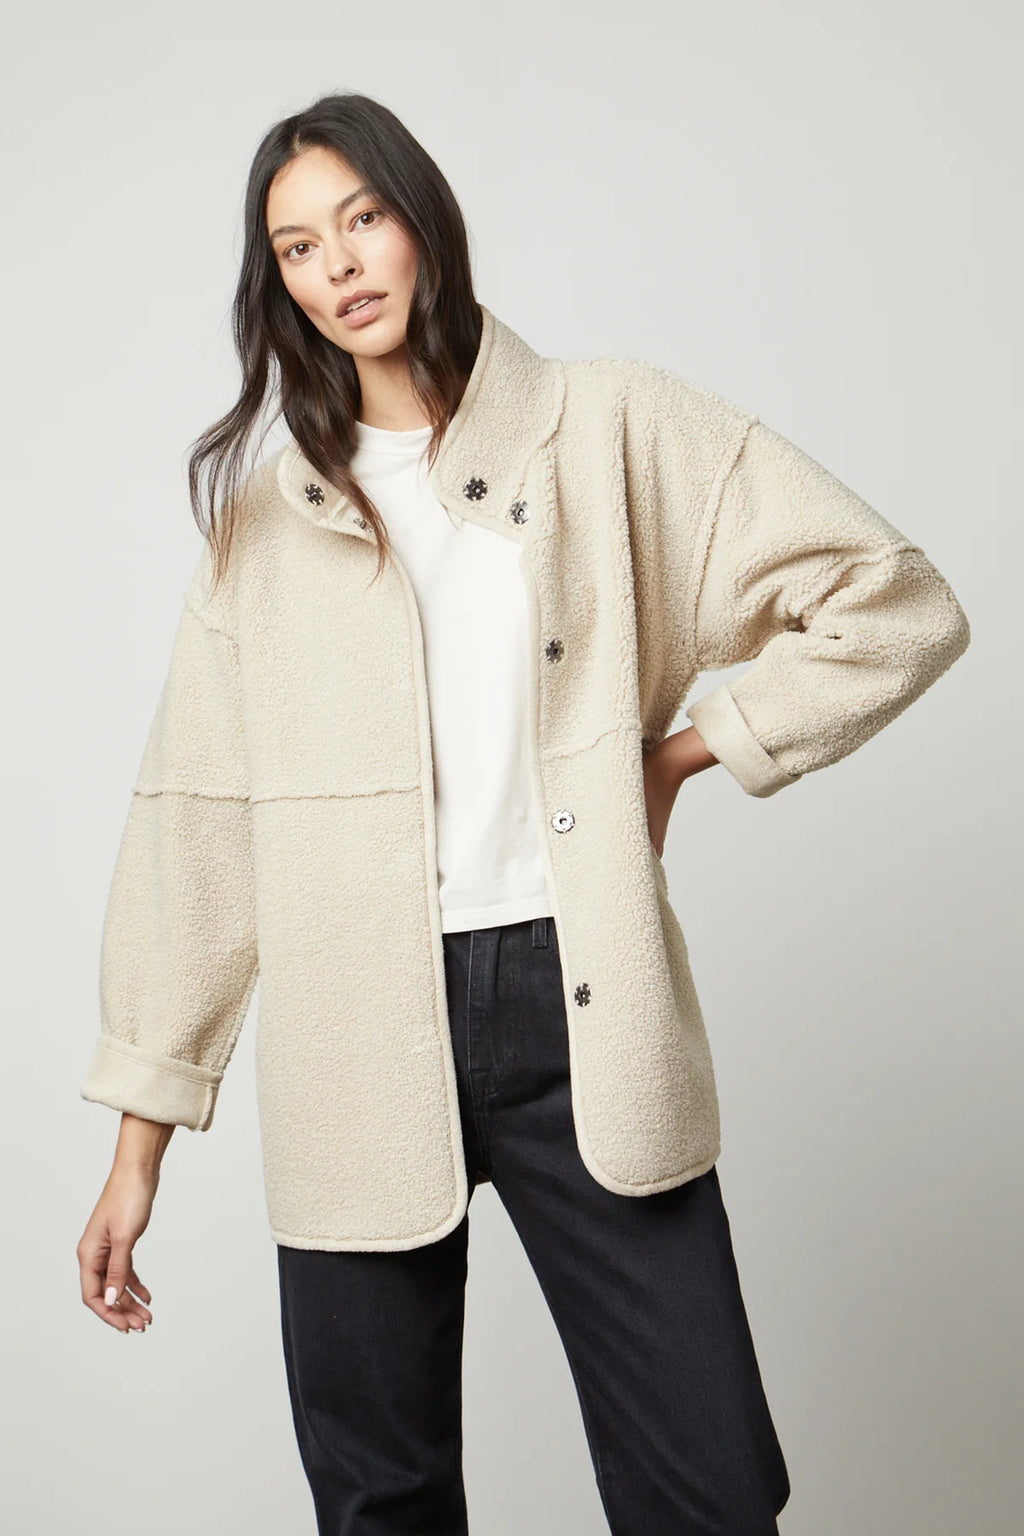 Up your jacket game with this reversible beauty. One side is an eco-chic faux sherpa, while the other side is a faux suede. With a relaxed silhouette that's perfect for layering over a chunky knit, it features slash pockets, popper buttons and a cool stand up collar.